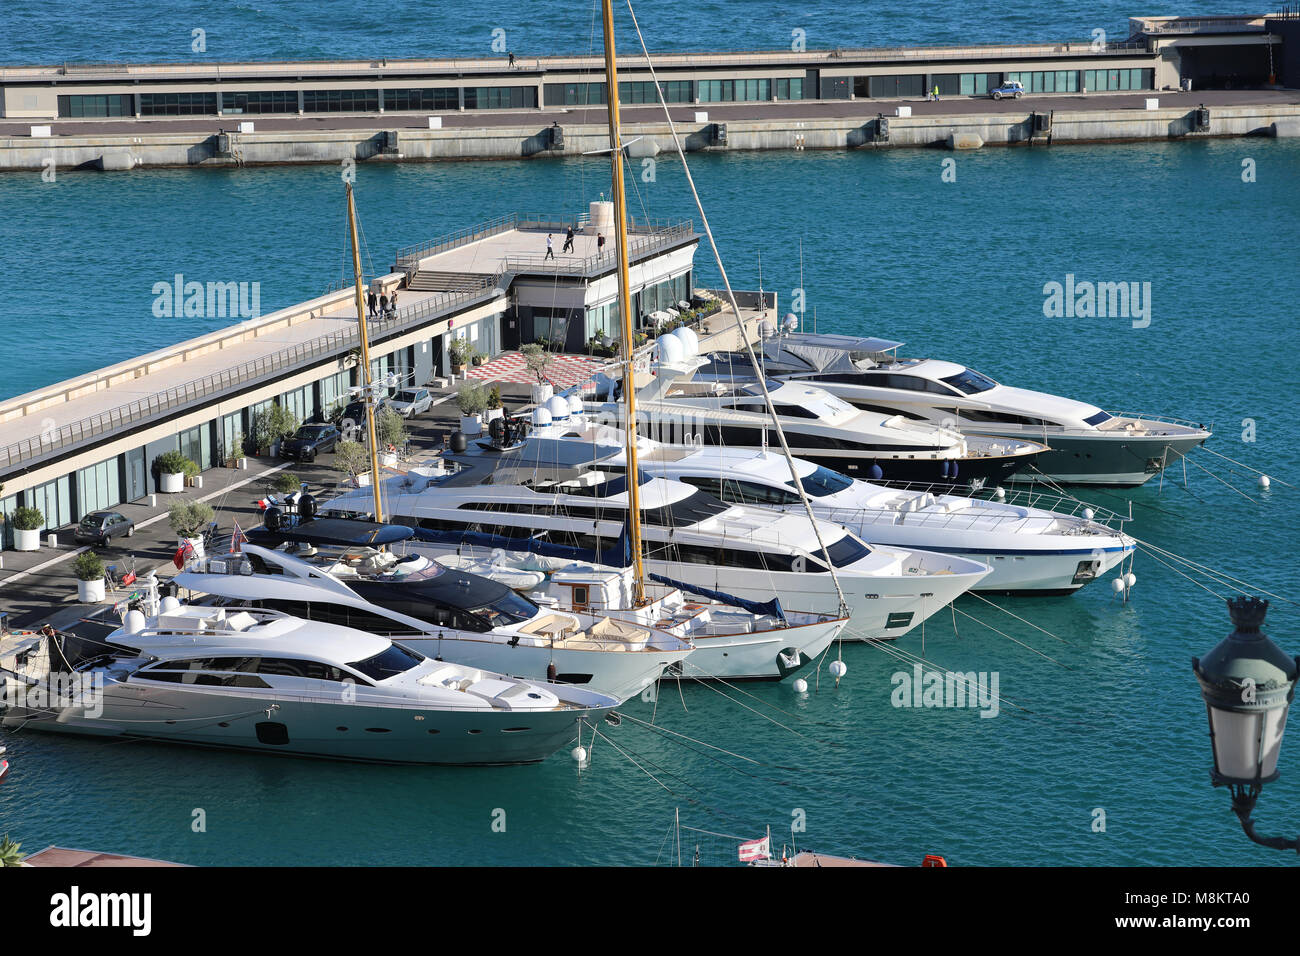 Monte-Carlo, Monaco - March 17, 2018: Luxurious Yachts And Megayachts Lined Up In The Monte-Carlo Harbour (Port Hercule), French Riviera Stock Photo